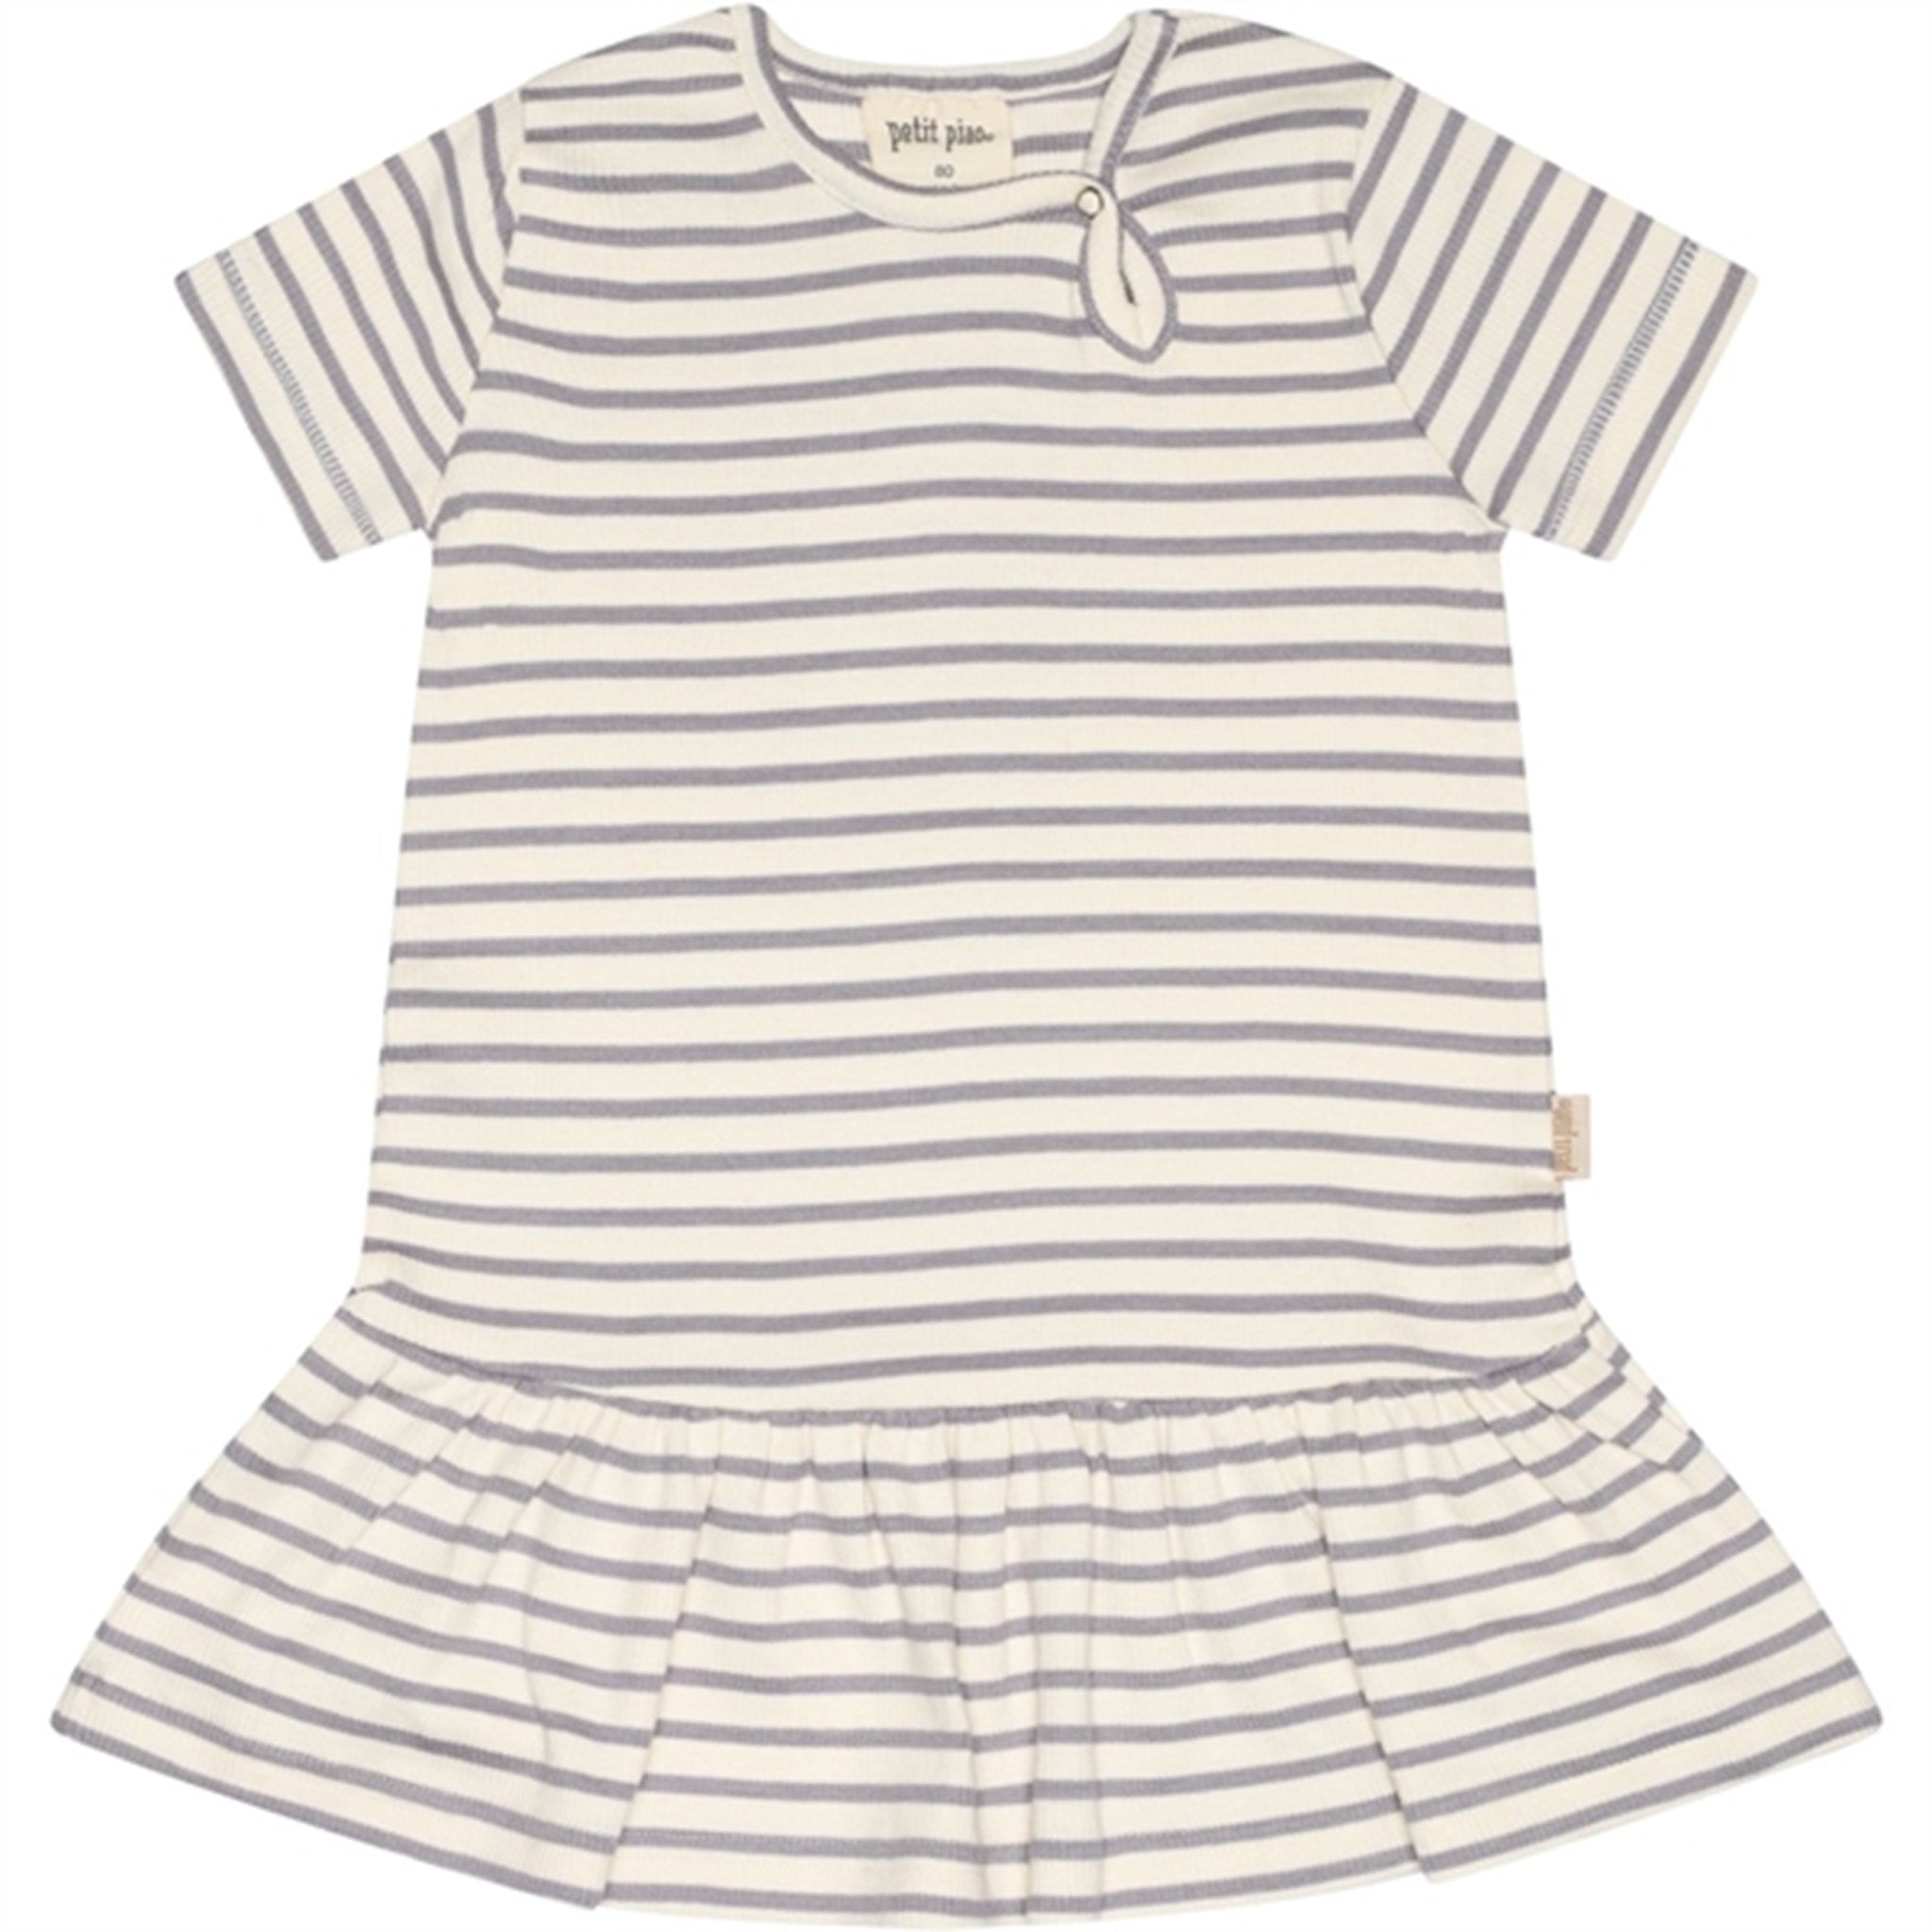 Petit Piao Dusty Lavender/Offwhite Dress S/S Modal Striped